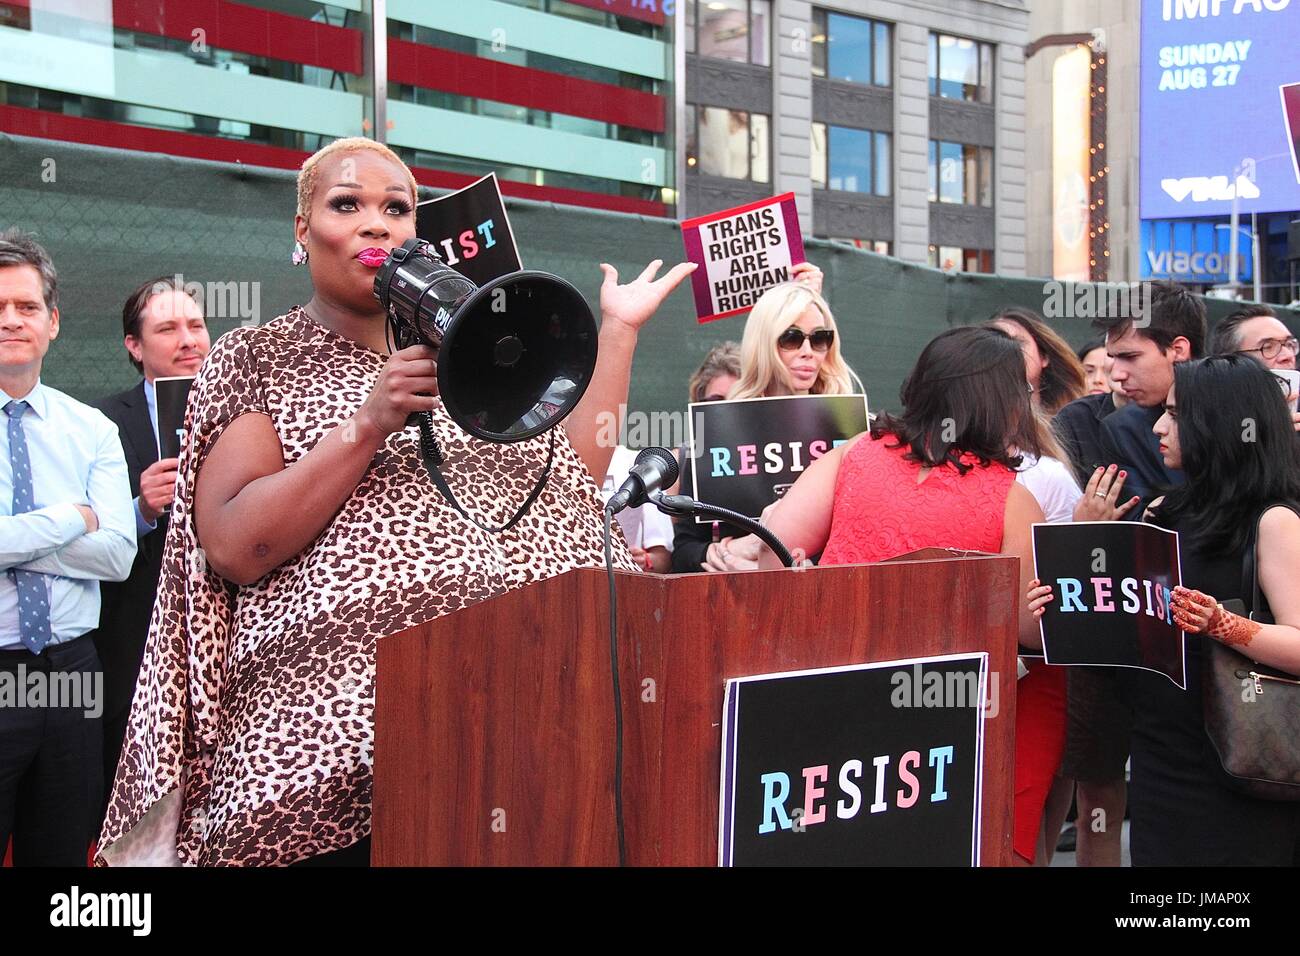 New York, NY, USA. 26th July, 2017. Peppermint, transgender 'RuPaul's Drag Race' contestant, at the rally in Times Square against U.S. President Donald Trump's ban on transgenders serving in the military in New York, New York on July 26, 2017. Credit: Rainmaker Photo/Media Punch/Alamy Live News Stock Photo